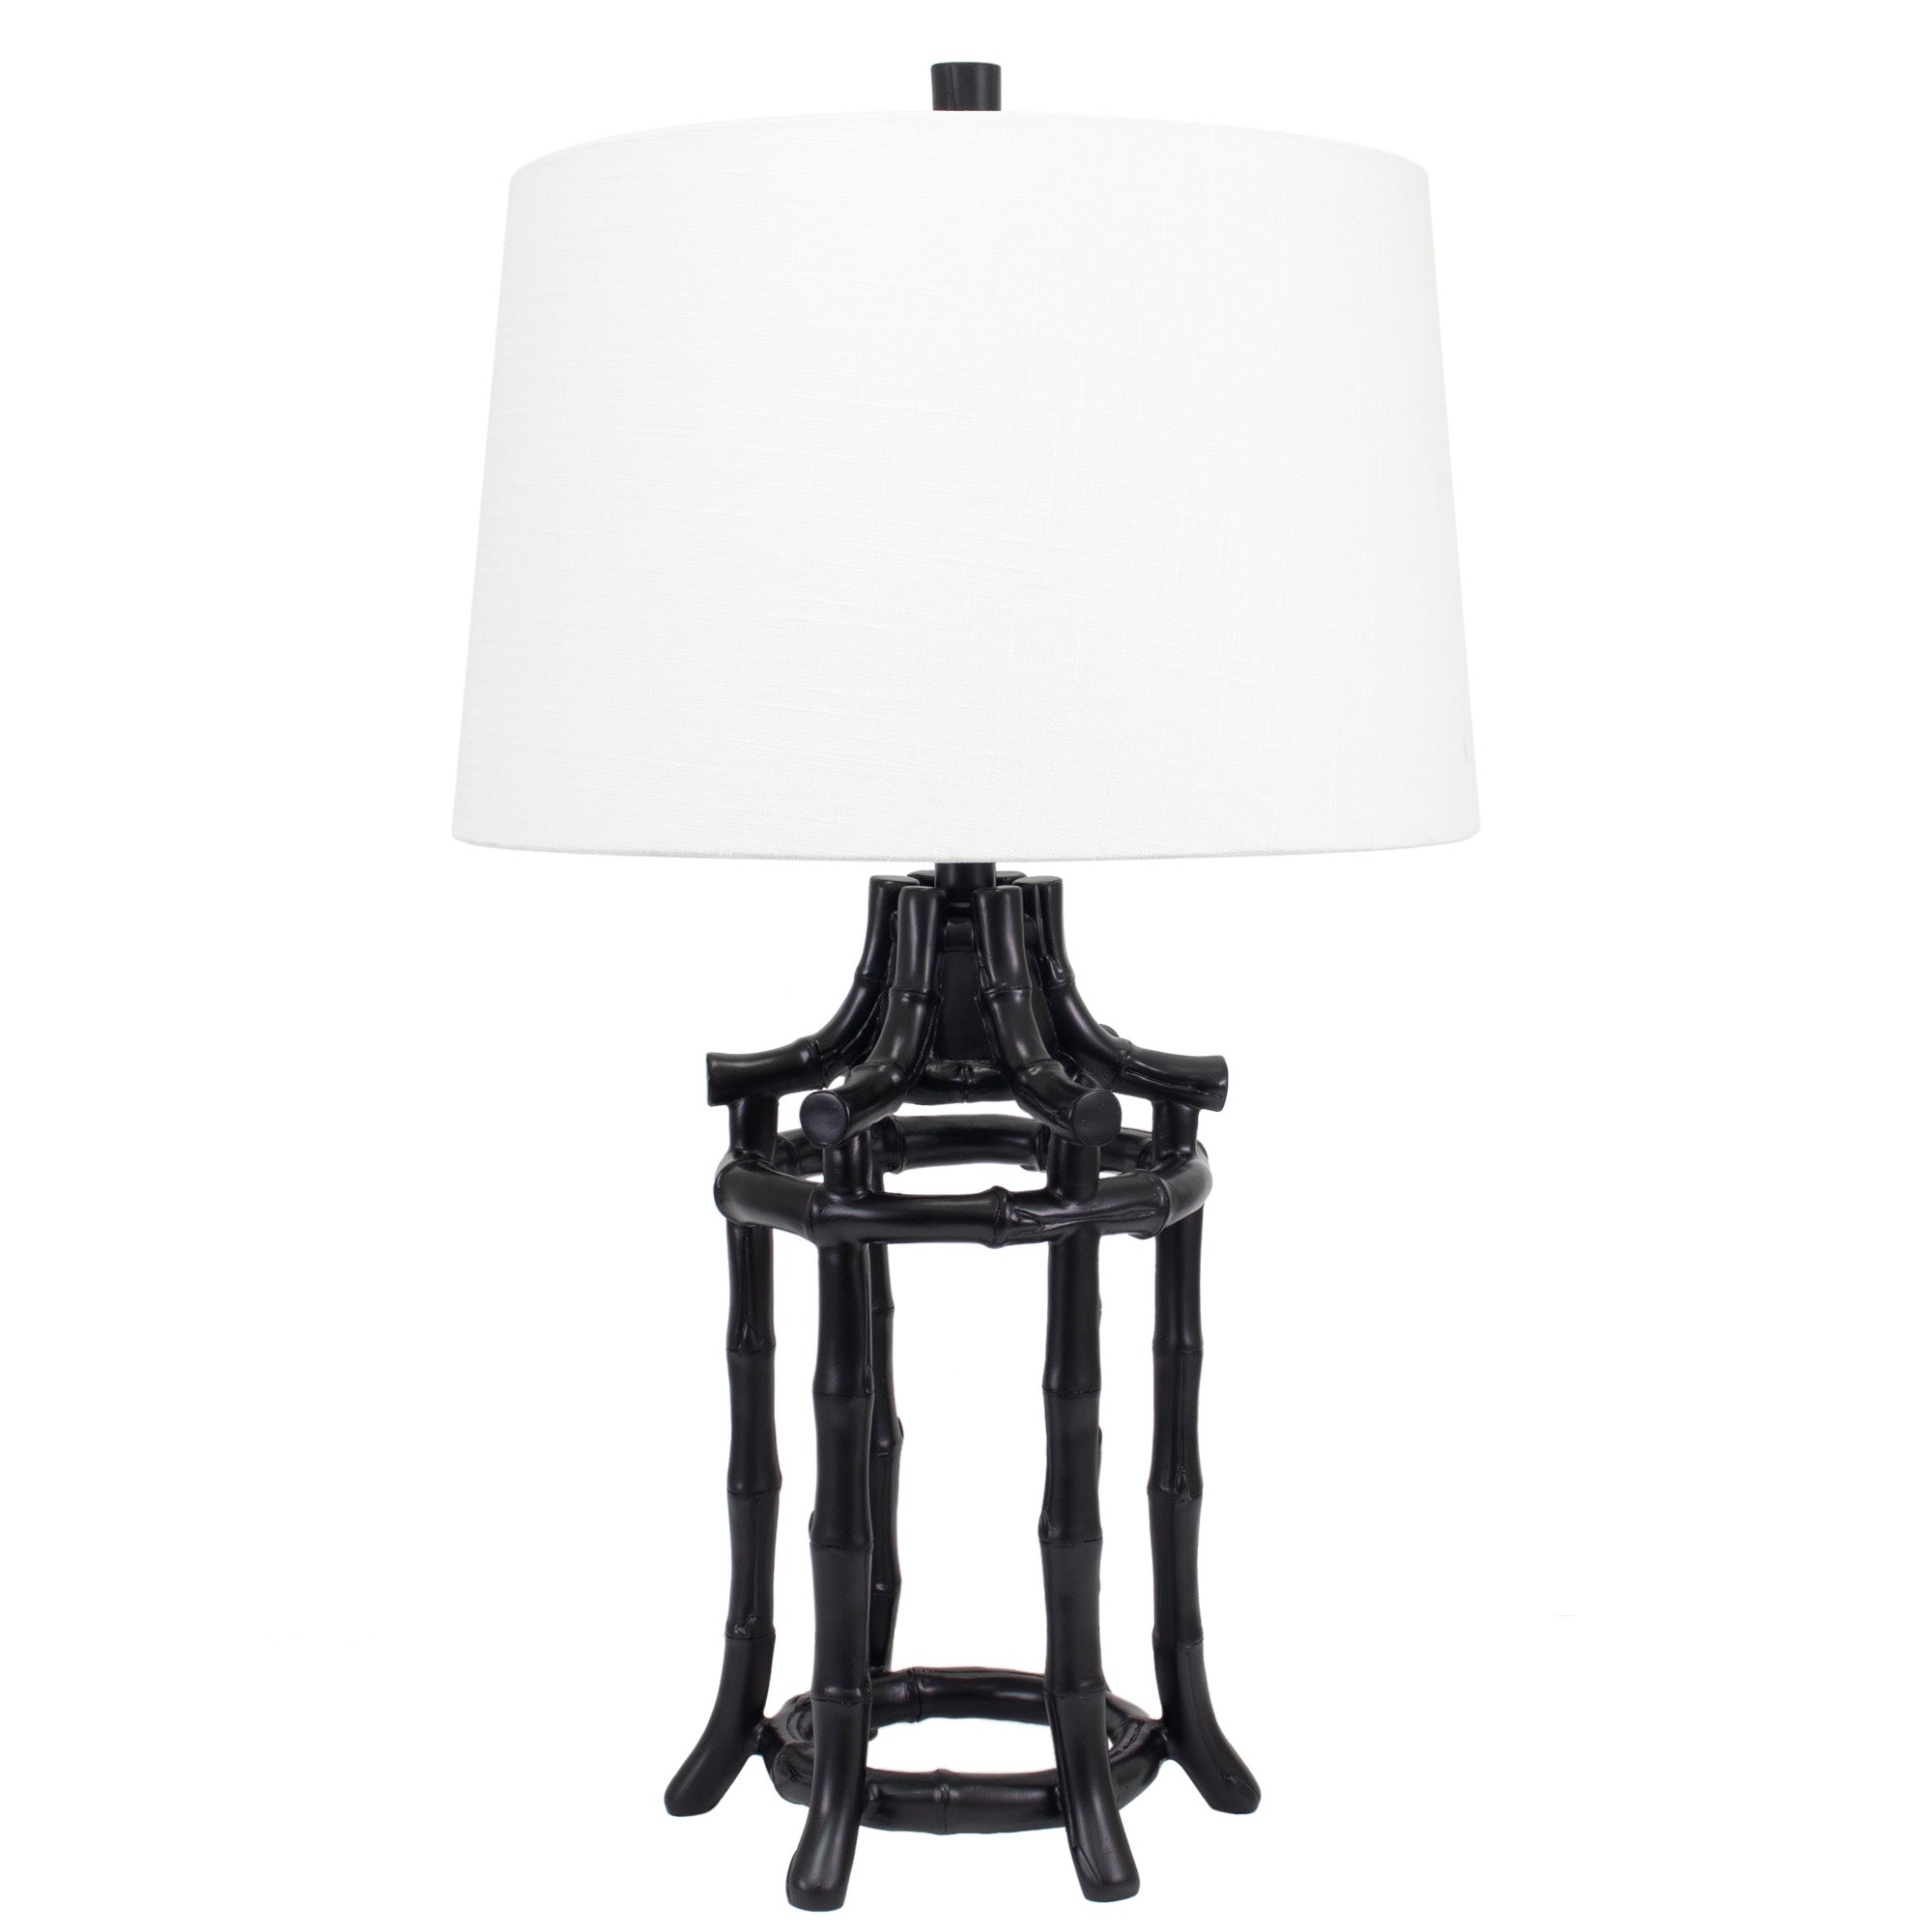 Bamboo Table Lamp, Black - Couture Lamps